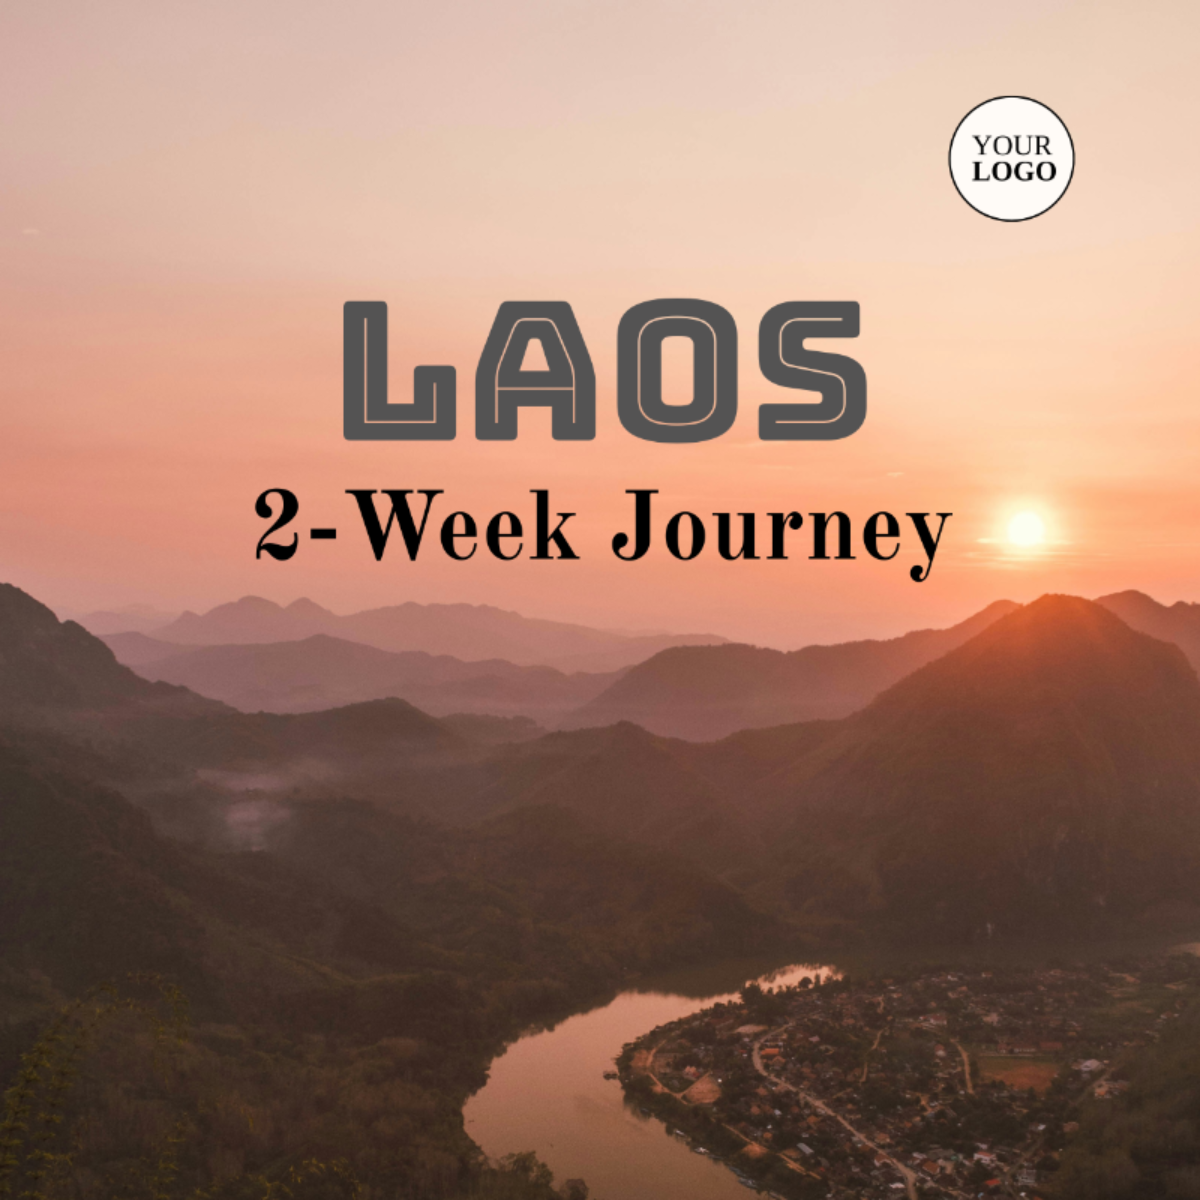 Free Laos Travel Itinerary Template